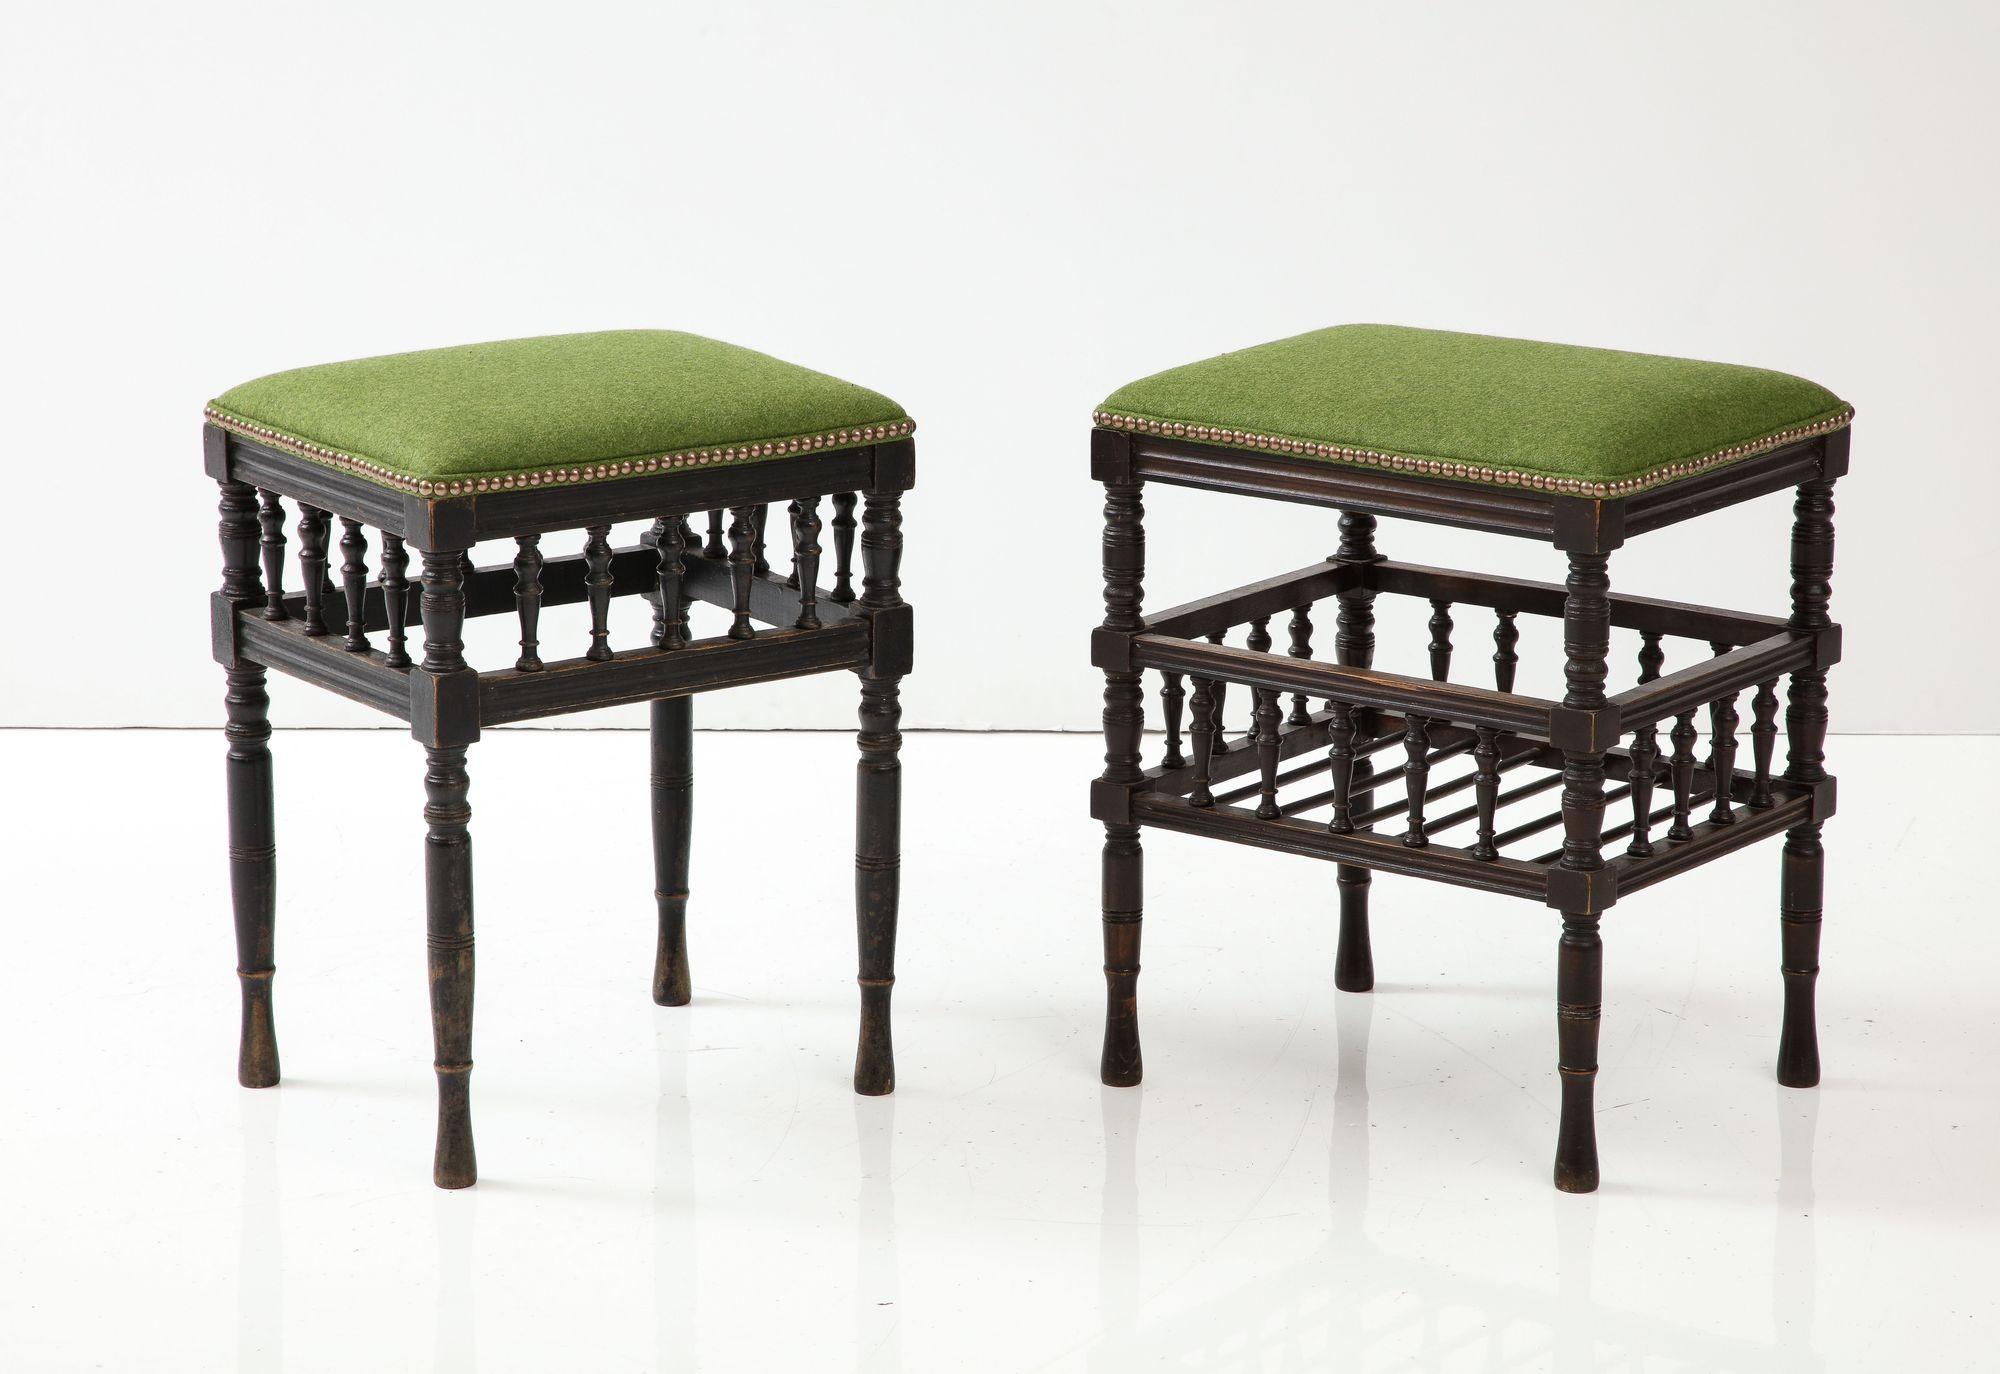 Two early 20th century aesthetic movement stools in ebonized beech with new lettuce green 100% scottish wool upholstered tops with brass stud detailing, both with box spindle stretcher galleries, one with a lower tier and one without.  Can work as a